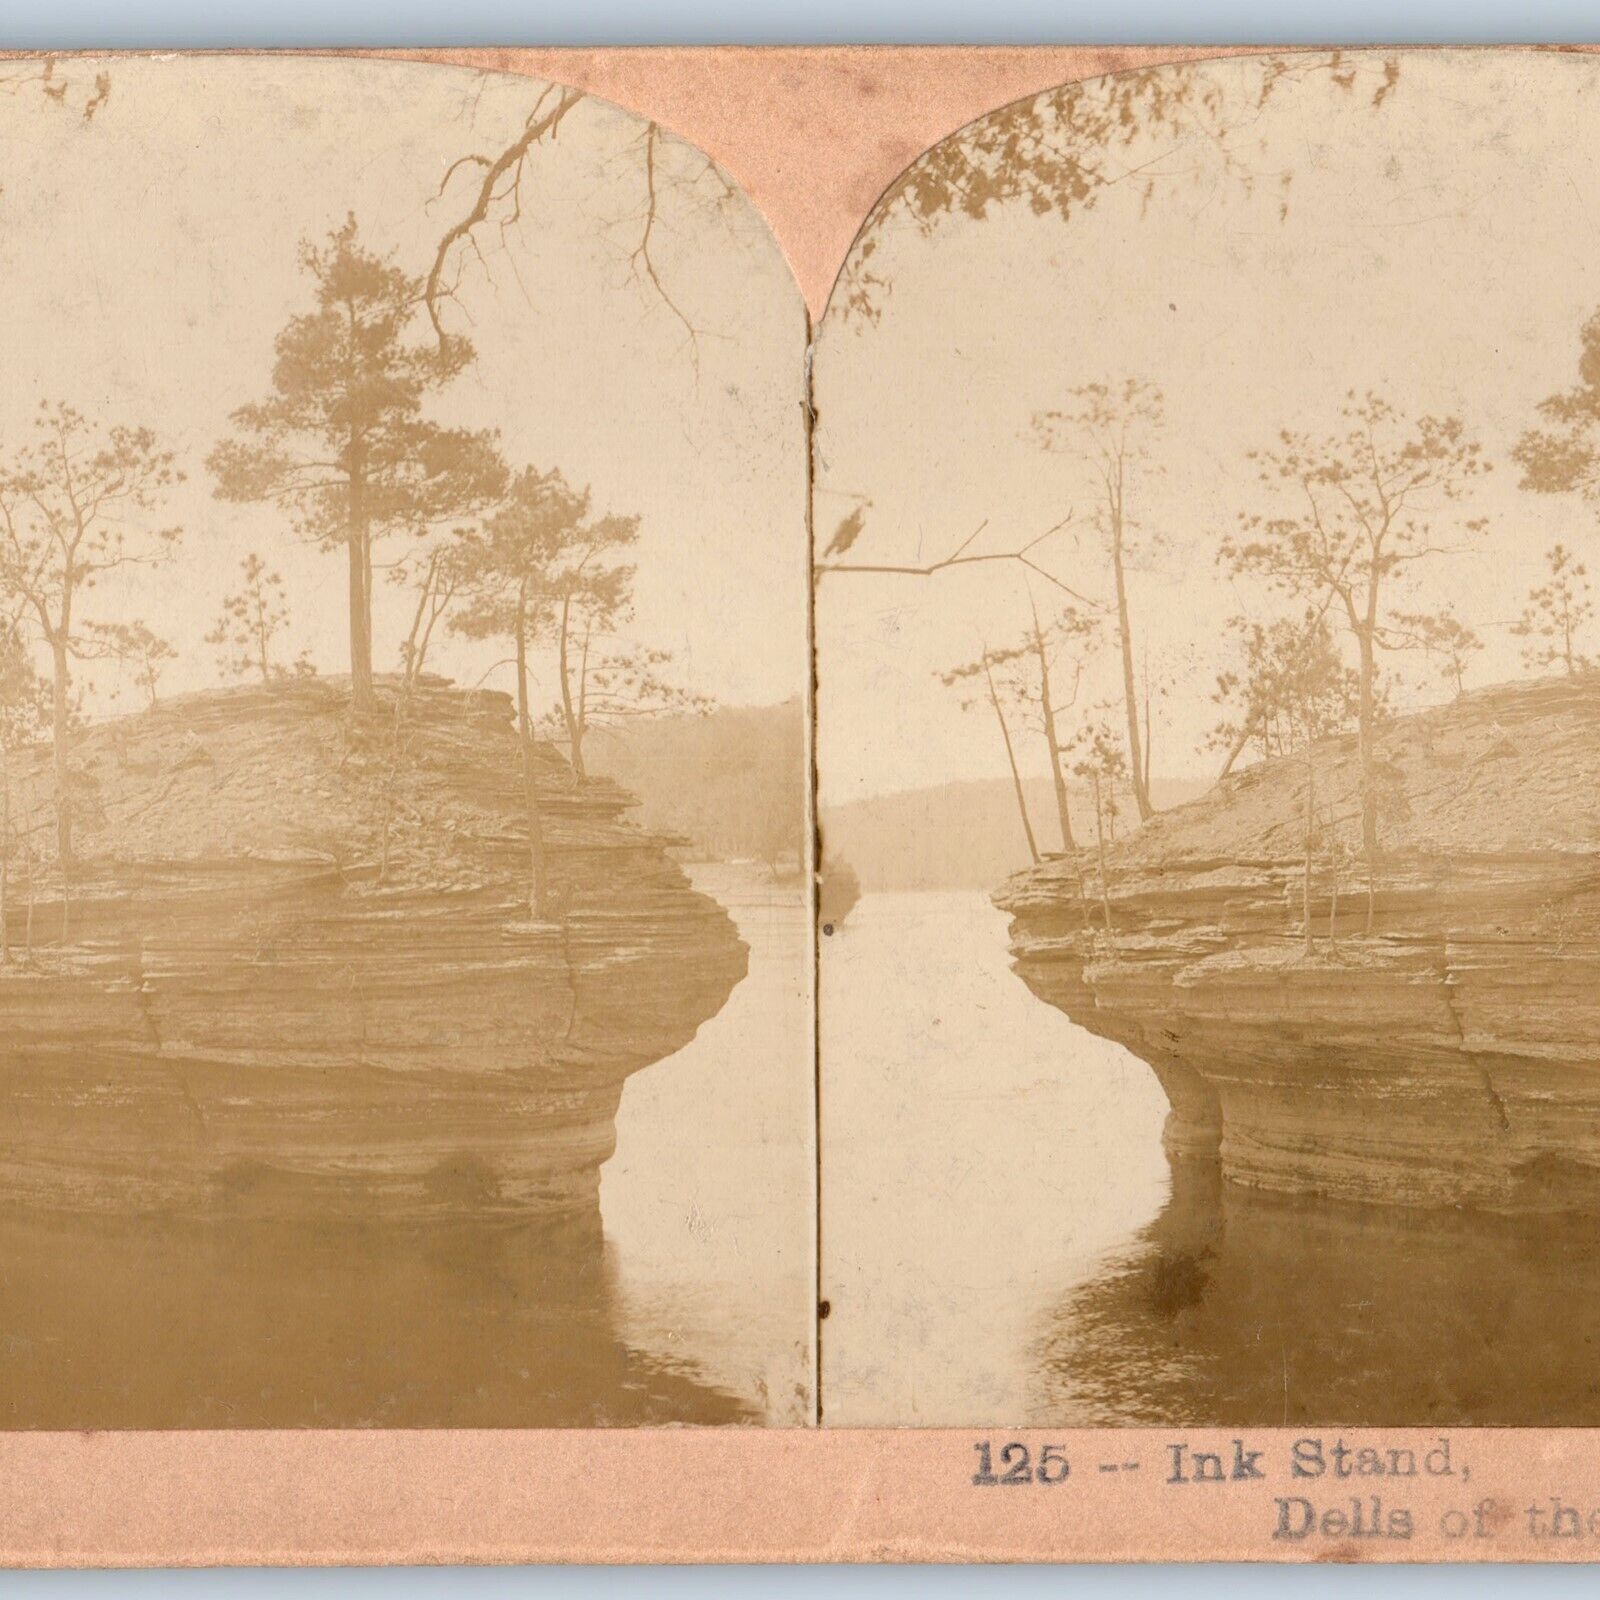 c1880s Wisconsin Dells Stereo Photo Ink Stand Rock North Western Baraboo Wis V24